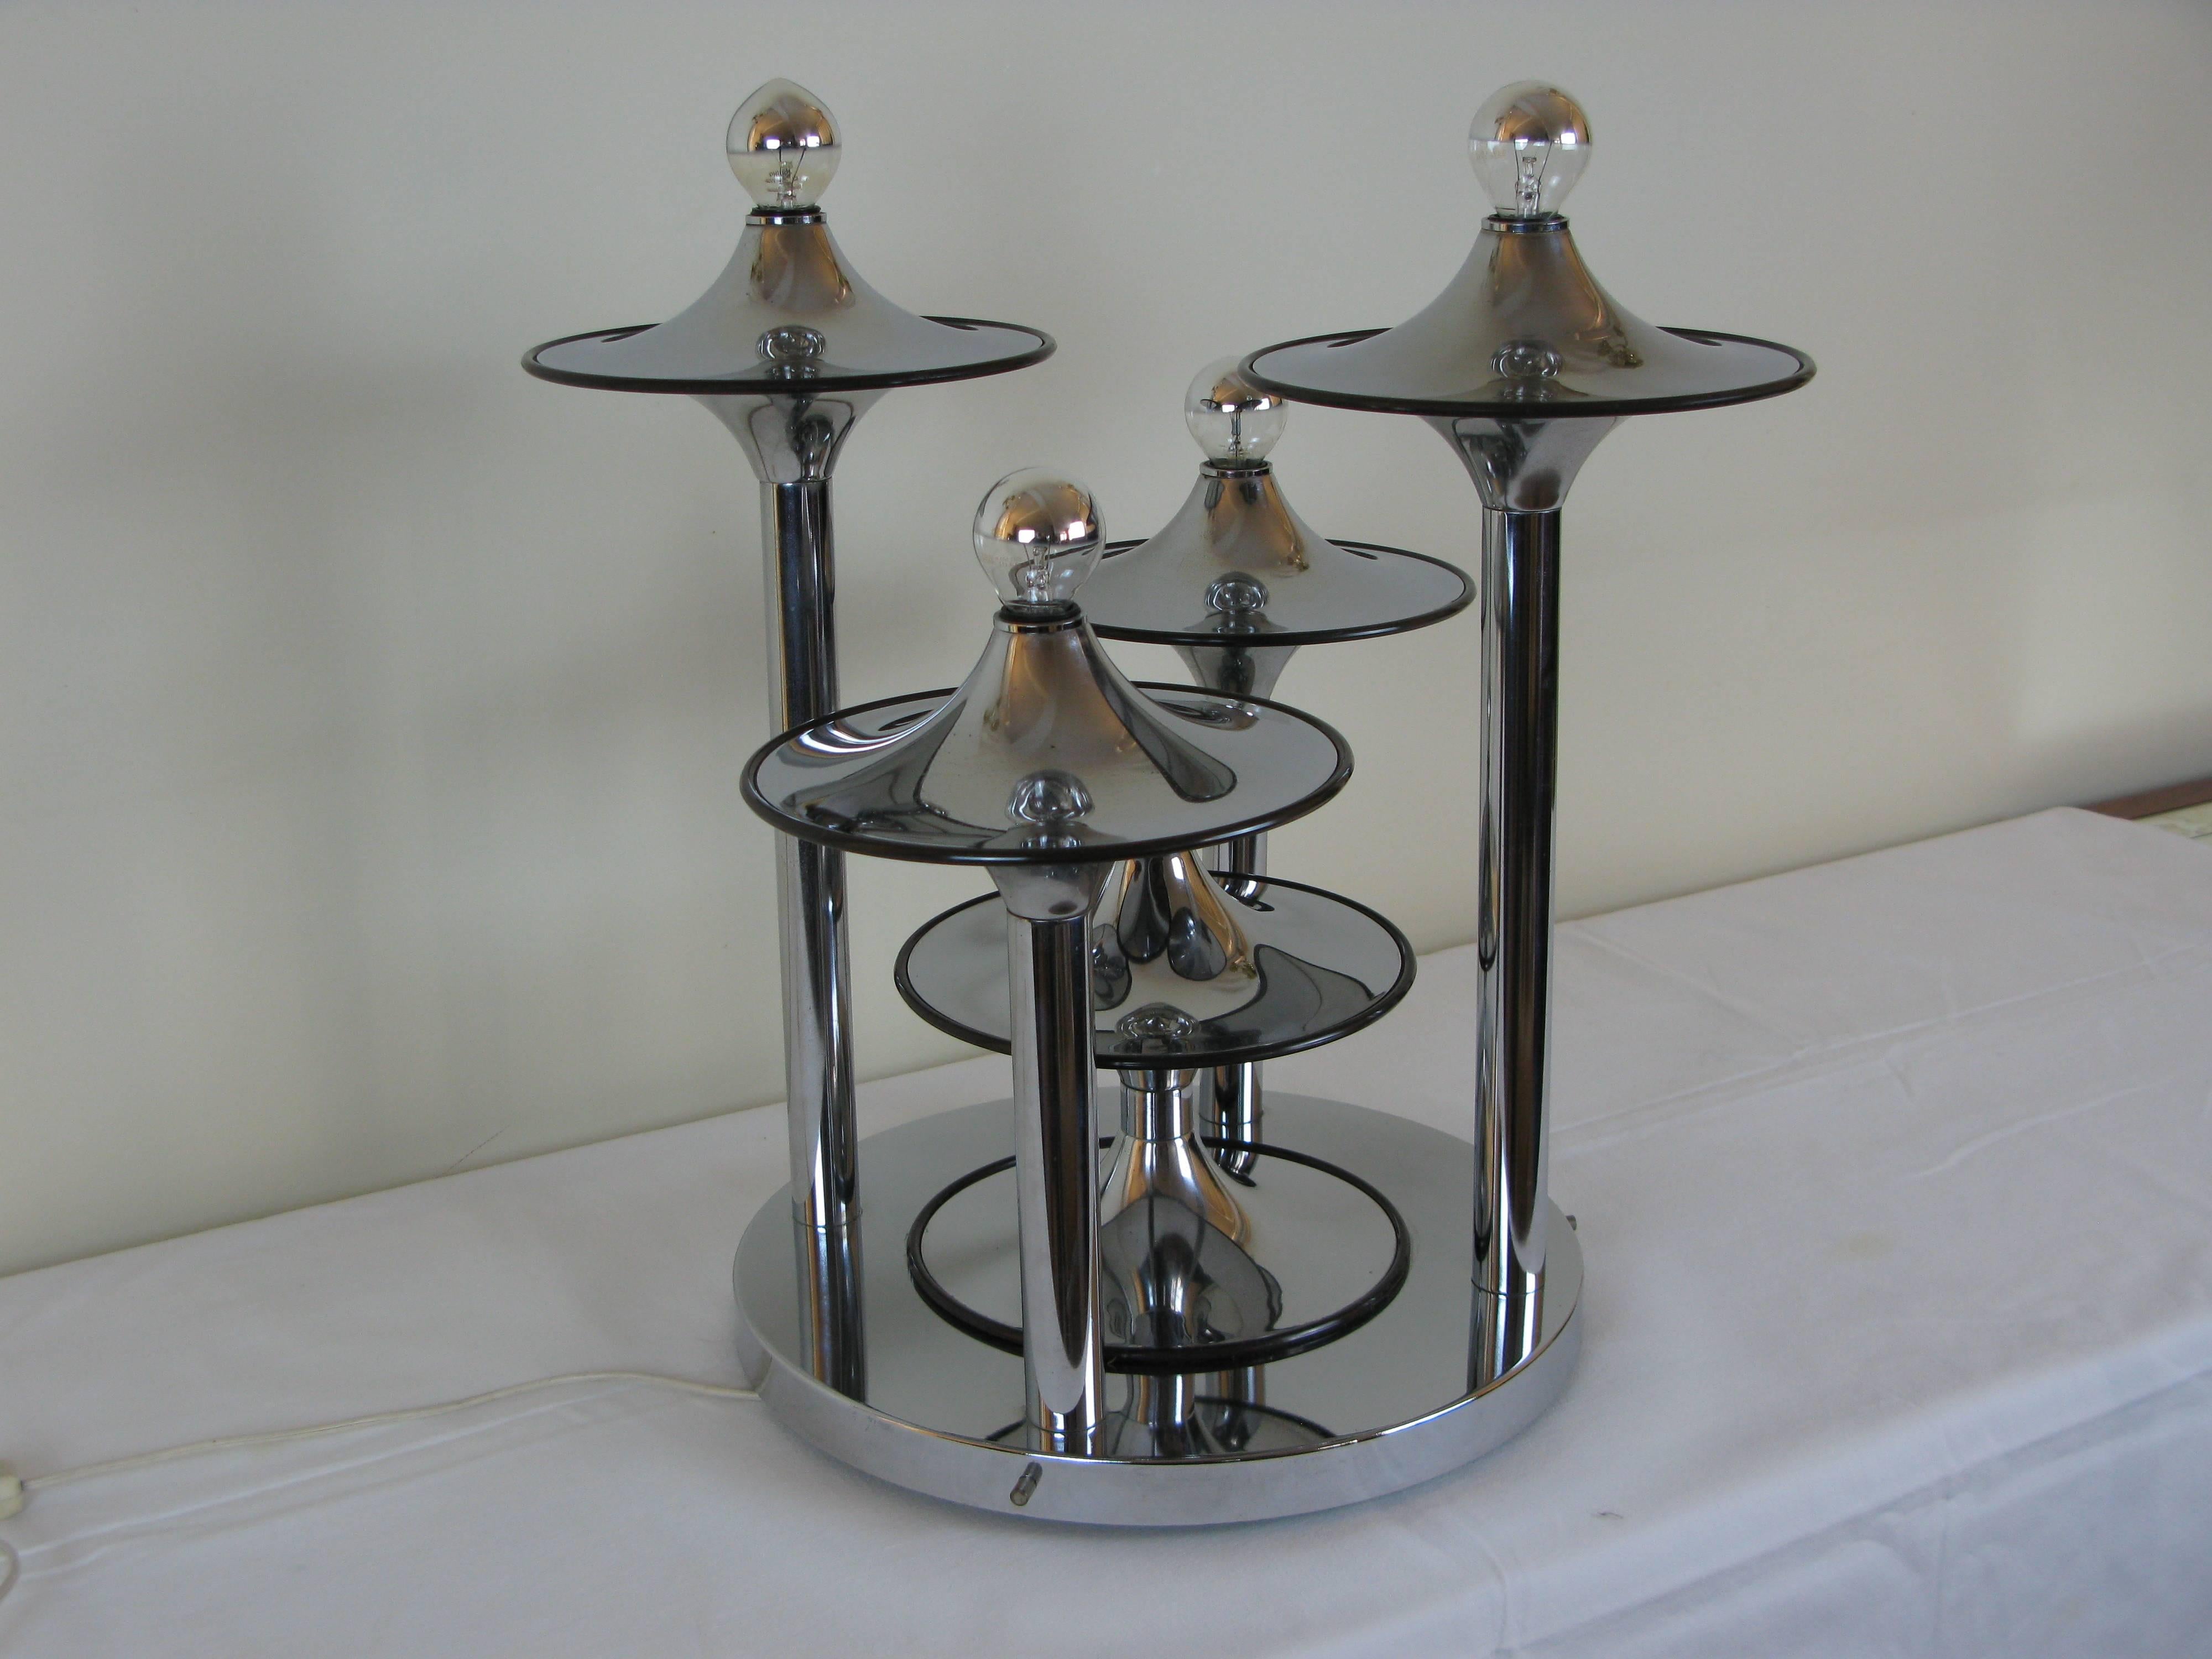 Italian table lamp in chrome metal consisting of circular base on which are fixed five lighted arms. Chrome metal disks forming flying soccer are surmounting the arms. 
1960s, Italian work attributed to Stilnovo.
Very good original condition.